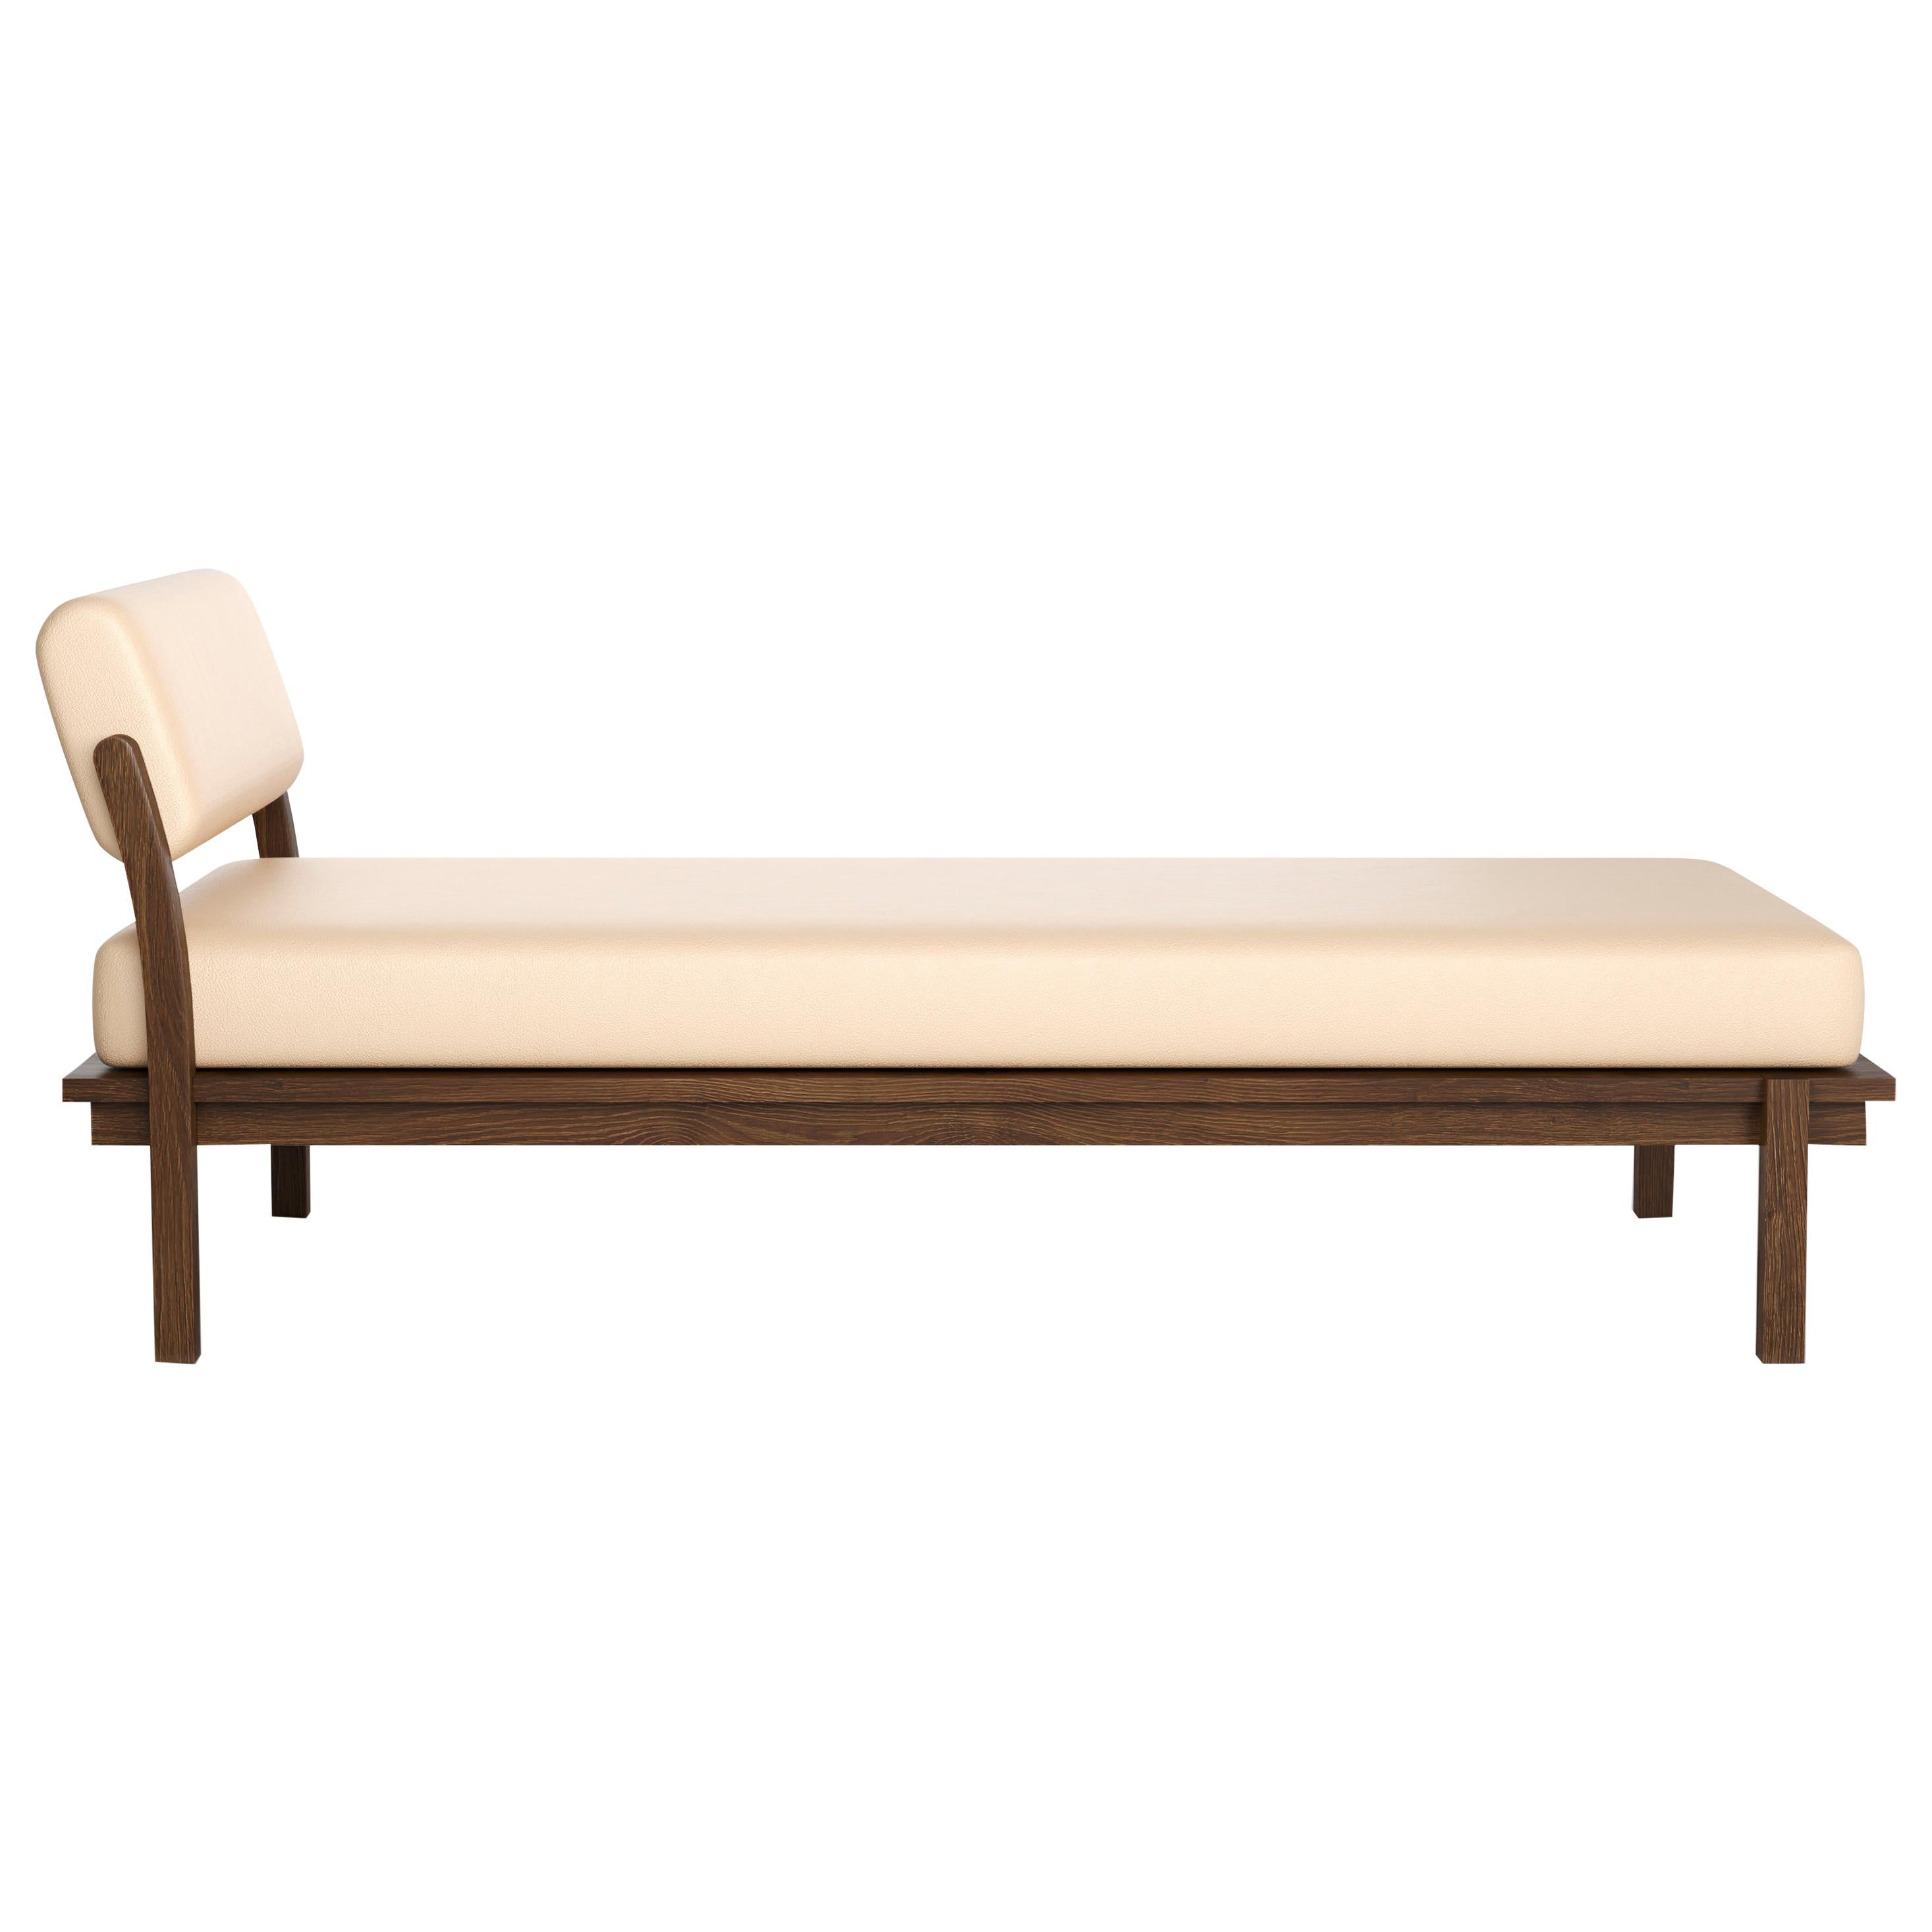 Wood Frame Daybed in Oak with Attached Neck Rest and Loose Cushion